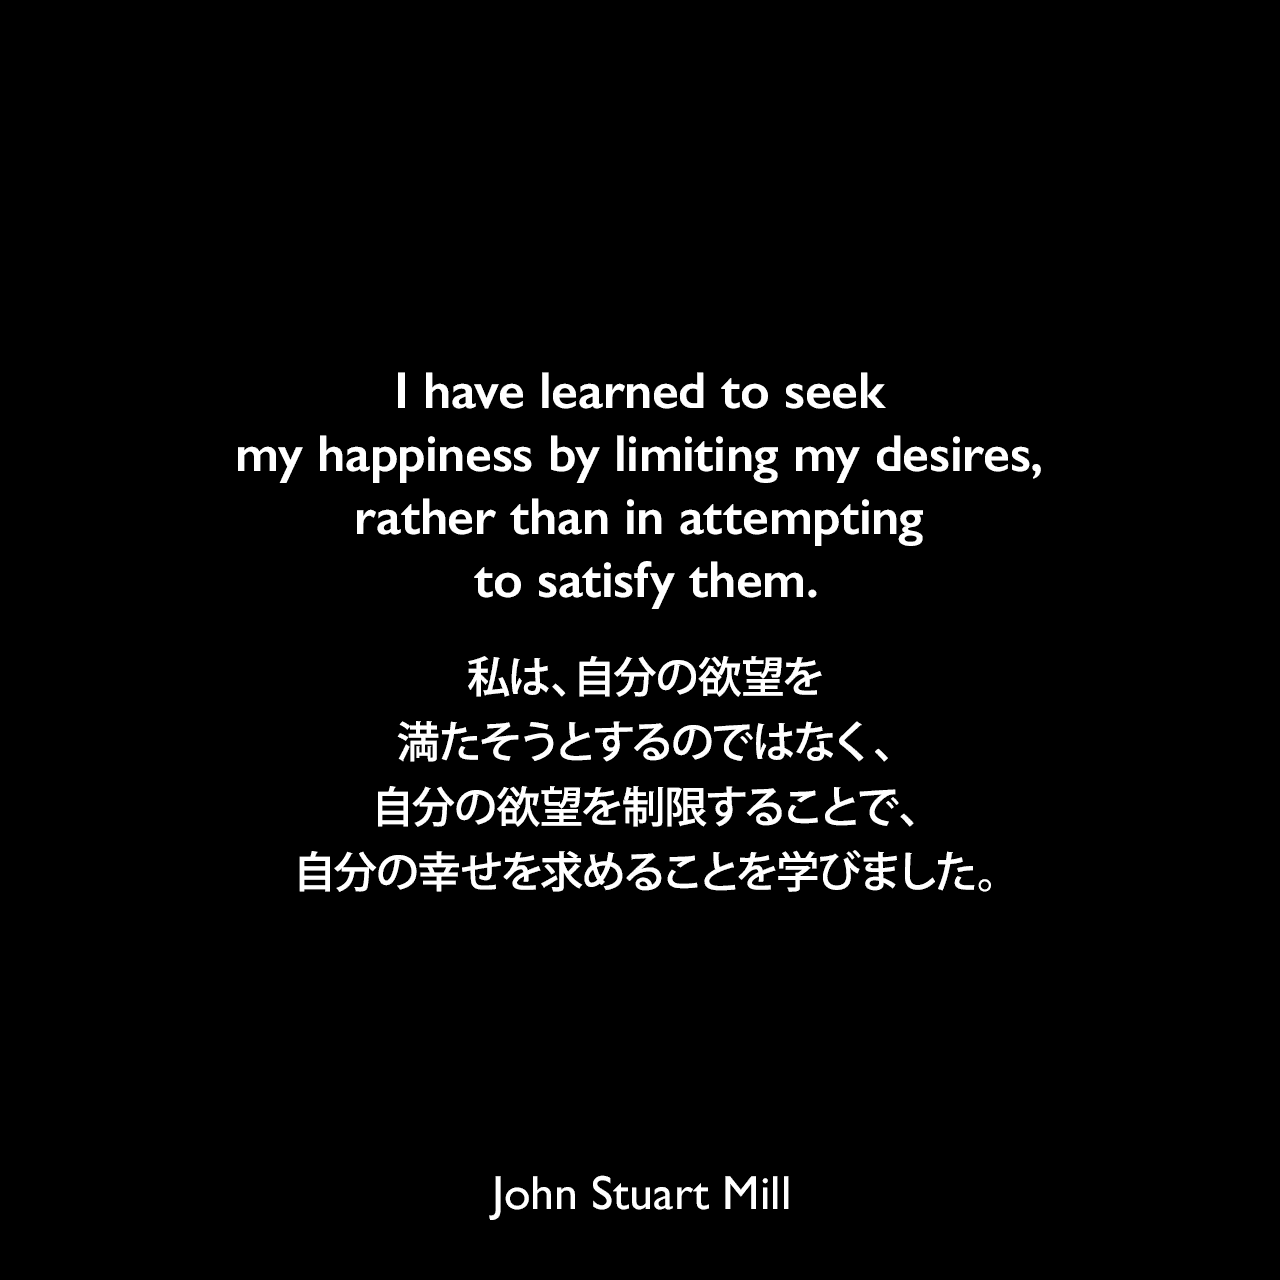 I have learned to seek my happiness by limiting my desires, rather than in attempting to satisfy them.私は、自分の欲望を満たそうとするのではなく、自分の欲望を制限することで、自分の幸せを求めることを学びました。John Stuart Mill